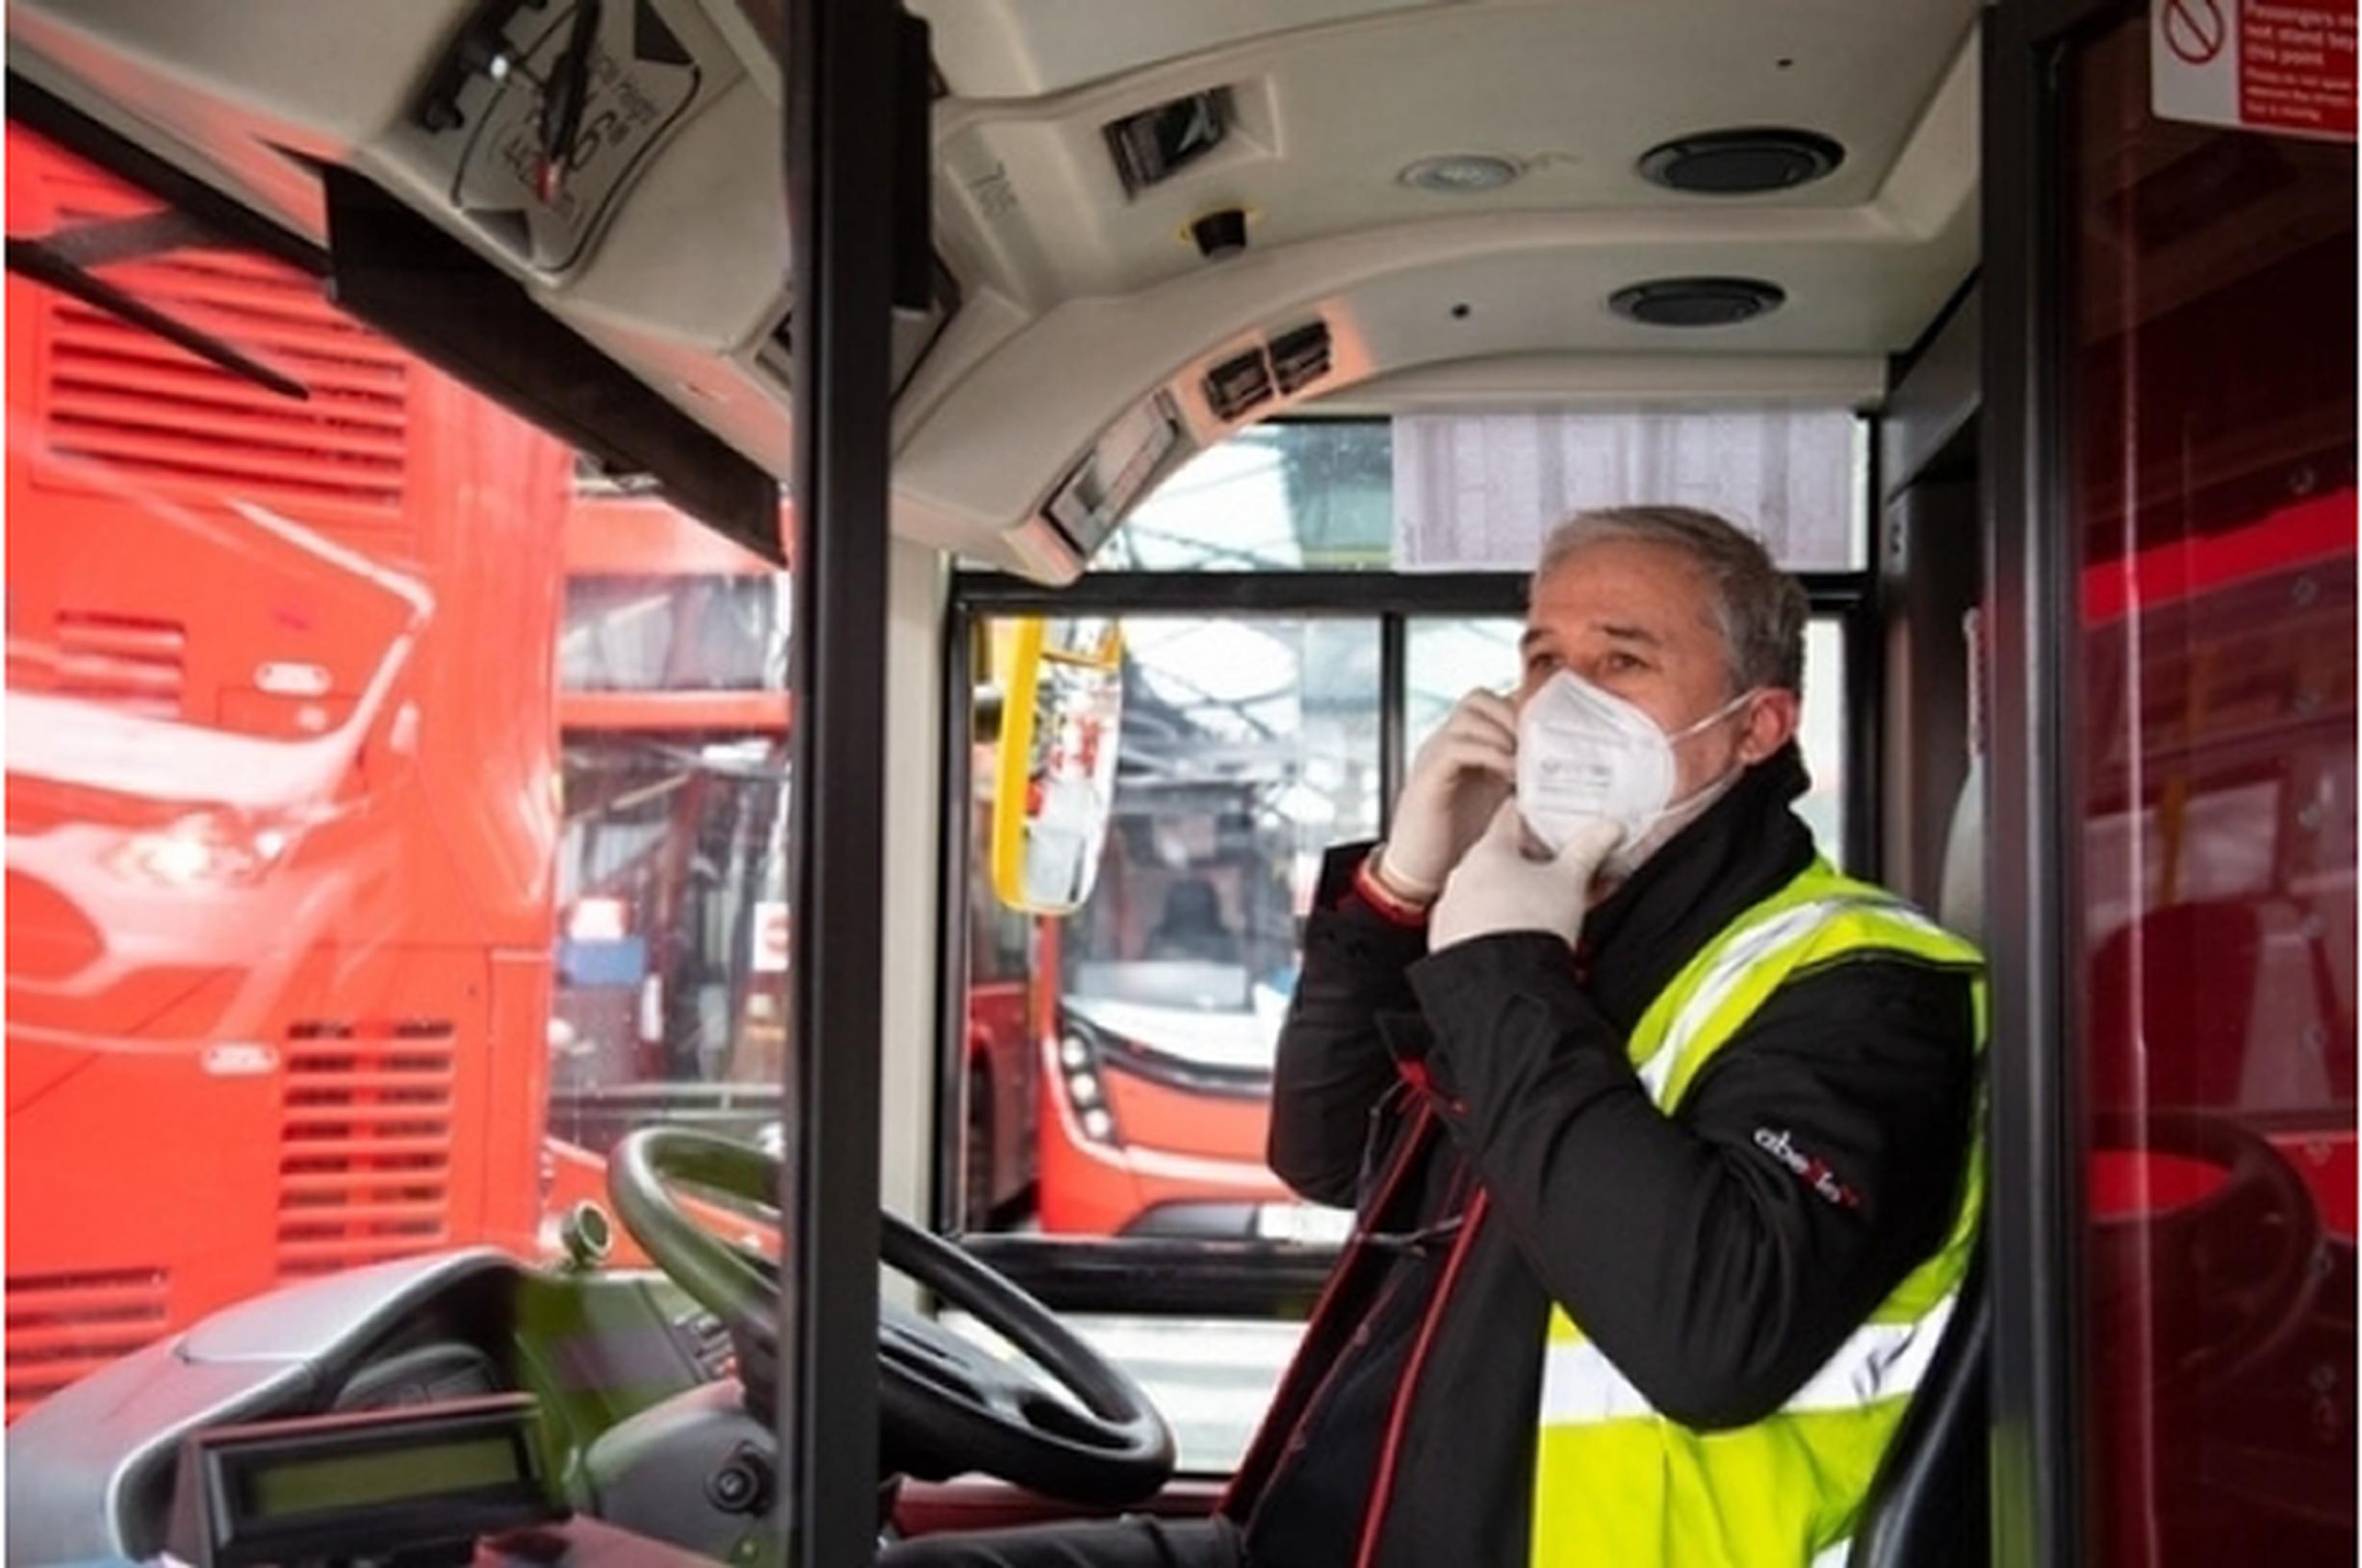 The RMT is concerned about the safety of bus drivers